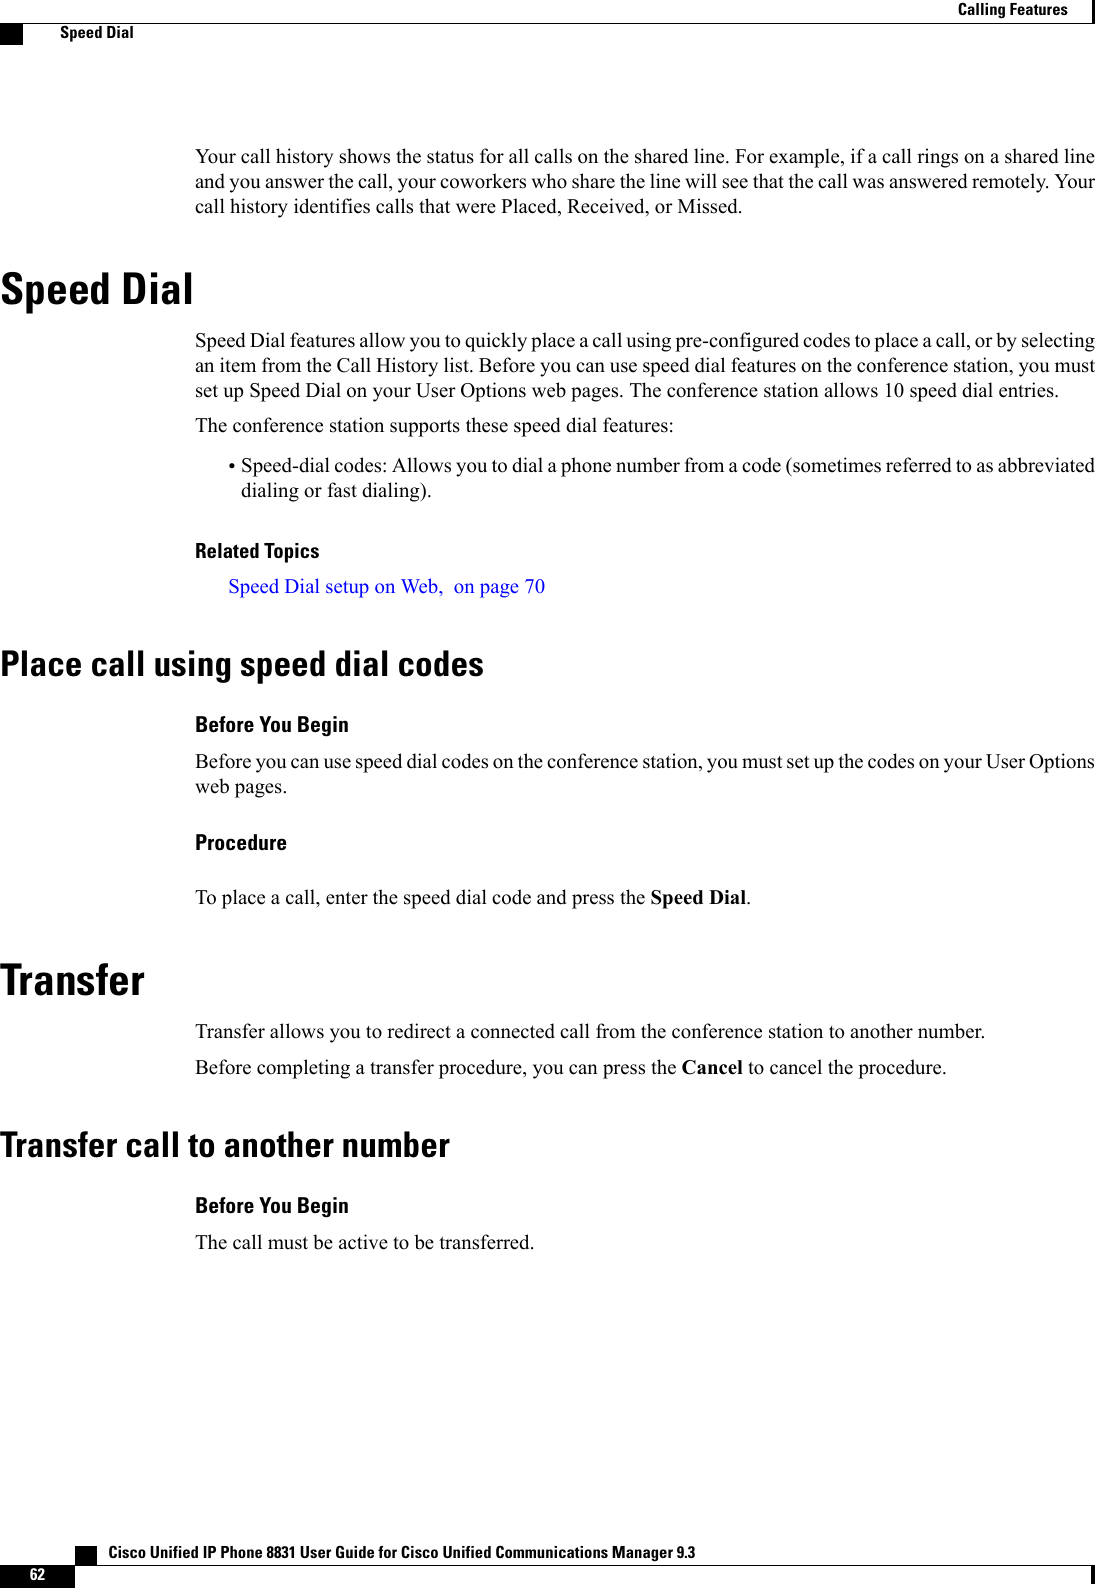 Your call history shows the status for all calls on the shared line. For example, if a call rings on a shared lineand you answer the call, your coworkers who share the line will see that the call was answered remotely. Yourcall history identifies calls that were Placed, Received, or Missed.Speed DialSpeed Dial features allow you to quickly place a call using pre-configured codes to place a call, or by selectingan item from the Call History list. Before you can use speed dial features on the conference station, you mustset up Speed Dial on your User Options web pages. The conference station allows 10 speed dial entries.The conference station supports these speed dial features:•Speed-dial codes: Allows you to dial a phone number from a code (sometimes referred to as abbreviateddialing or fast dialing).Related TopicsSpeed Dial setup on Web, on page 70Place call using speed dial codesBefore You BeginBefore you can use speed dial codes on the conference station, you must set up the codes on your User Optionsweb pages.ProcedureTo place a call, enter the speed dial code and press the Speed Dial.TransferTransfer allows you to redirect a connected call from the conference station to another number.Before completing a transfer procedure, you can press the Cancel to cancel the procedure.Transfer call to another numberBefore You BeginThe call must be active to be transferred.   Cisco Unified IP Phone 8831 User Guide for Cisco Unified Communications Manager 9.362Calling FeaturesSpeed Dial